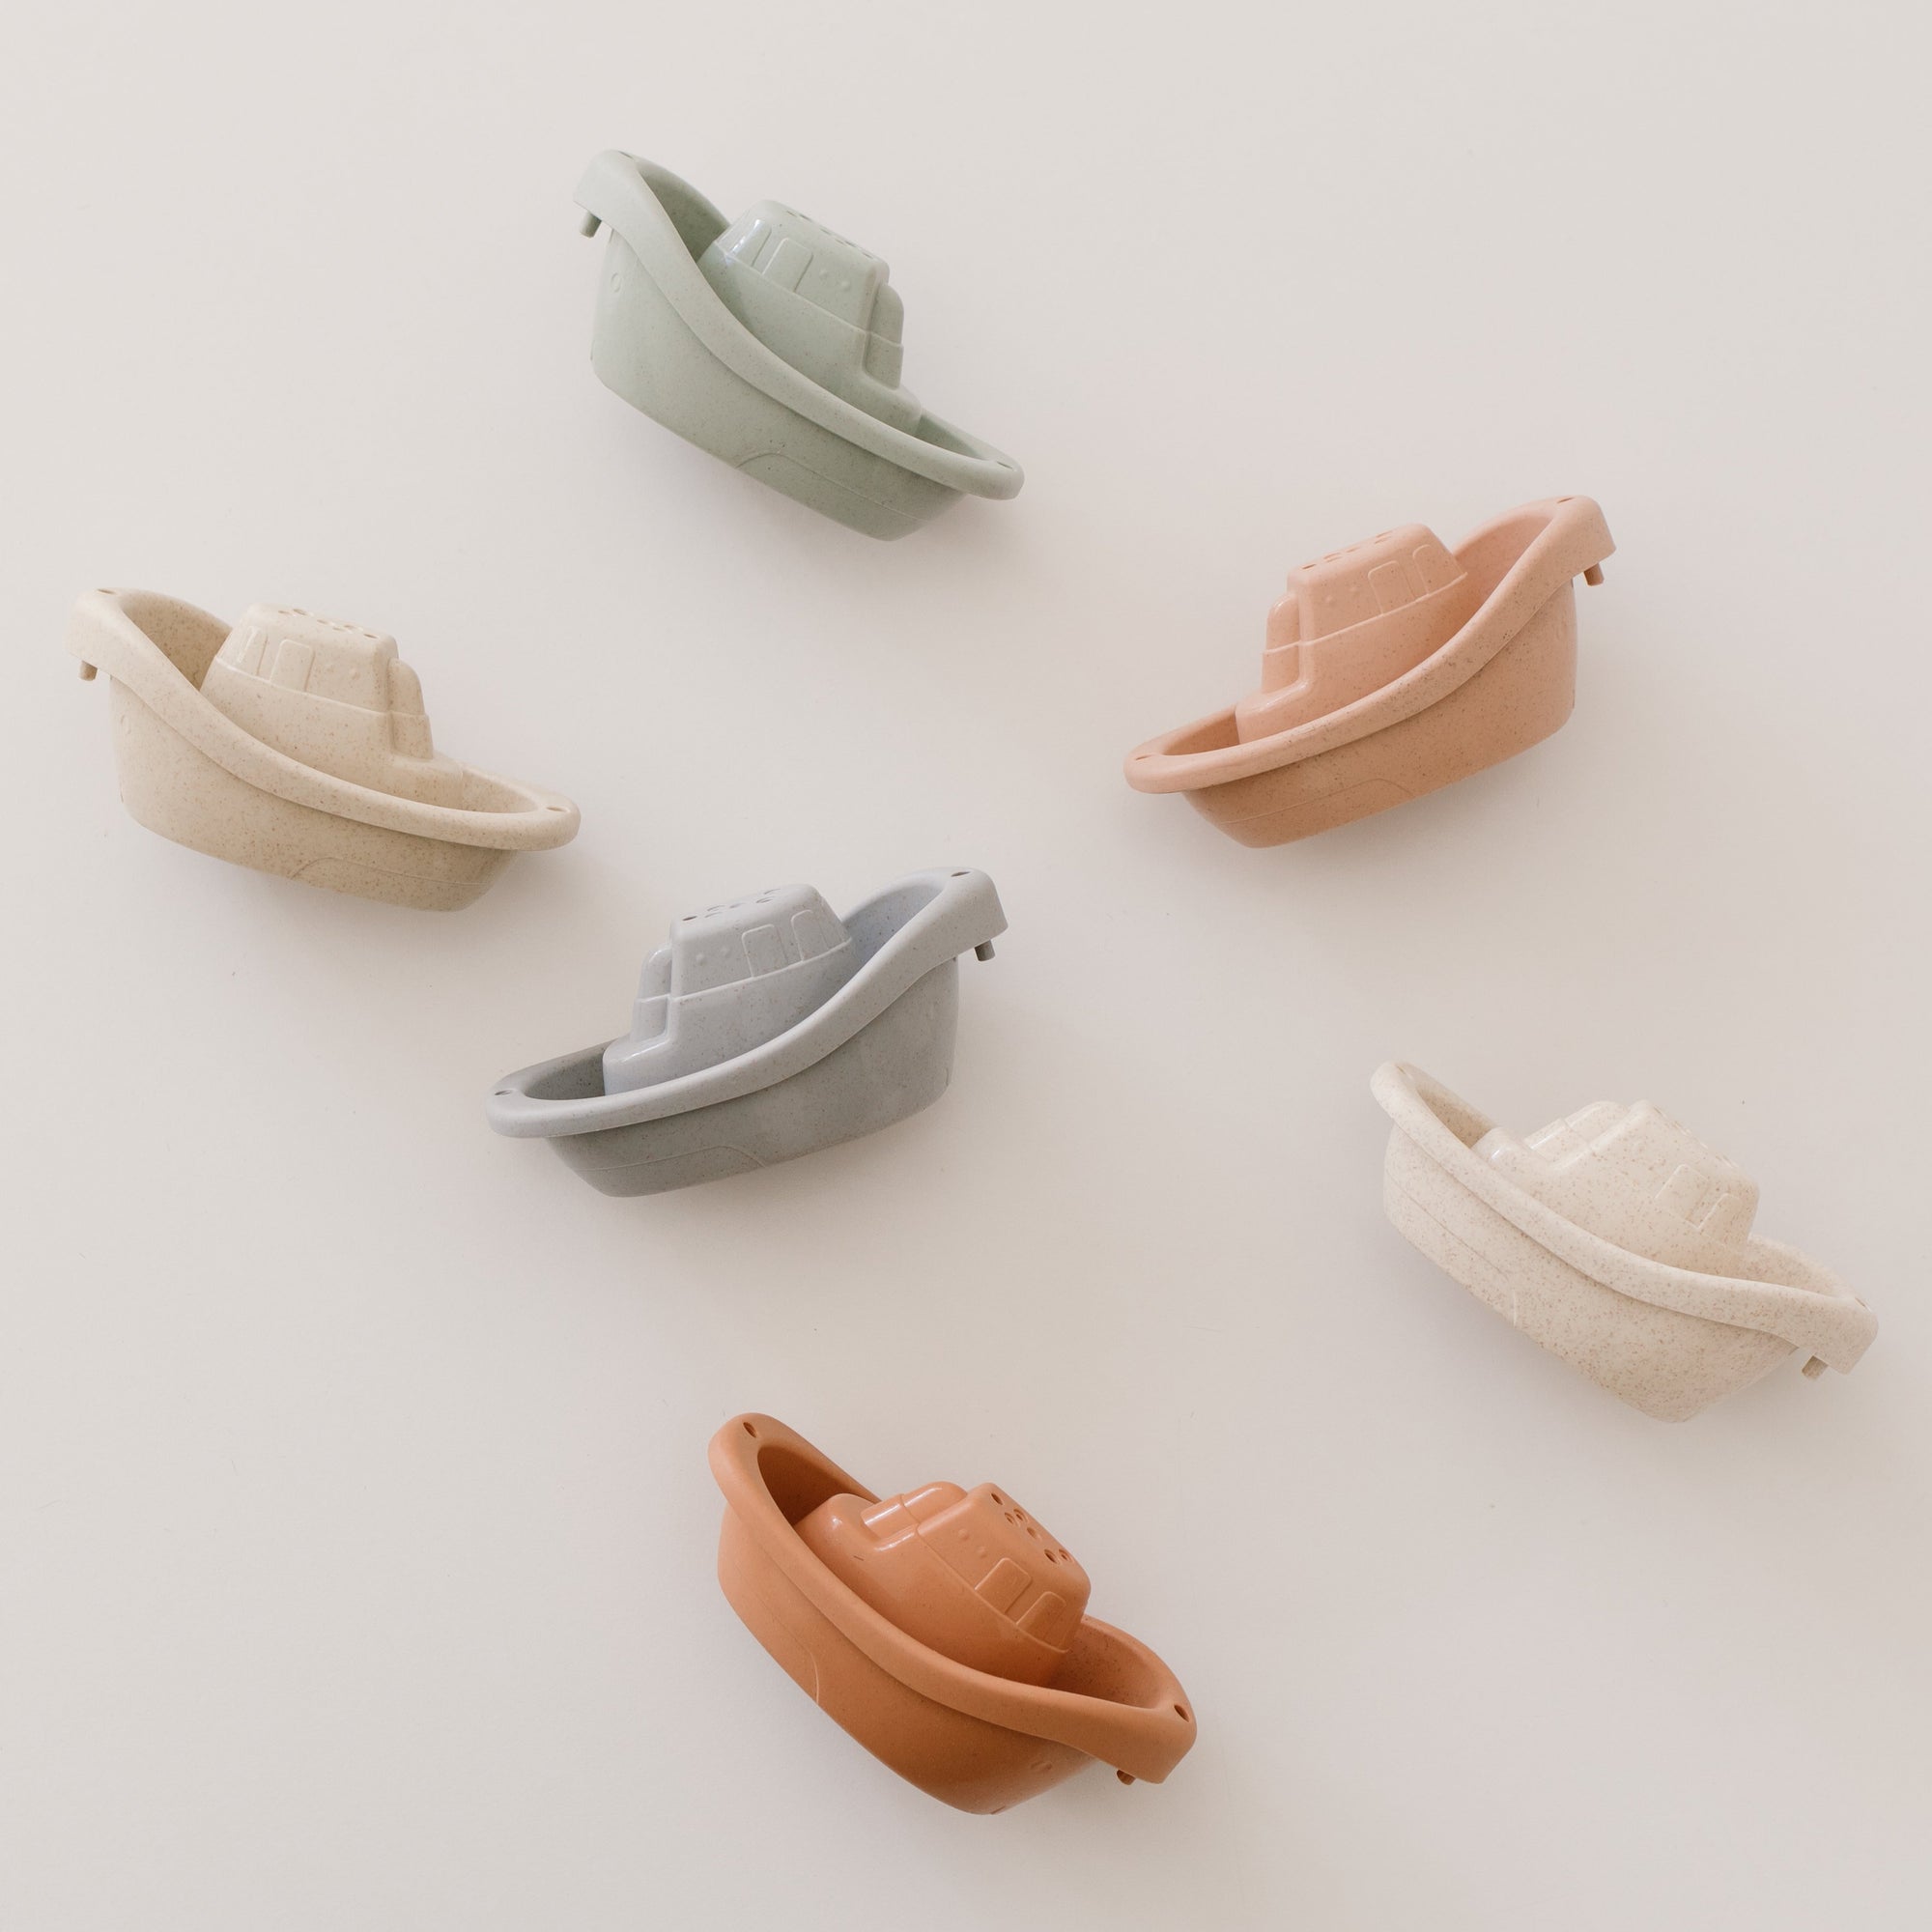 Bath time just got a whole lot cuter with these sweet little boat sets. Made from our popular biodegradable wheat straw, this sturdy design is practical, fun and environmentally friendly. 